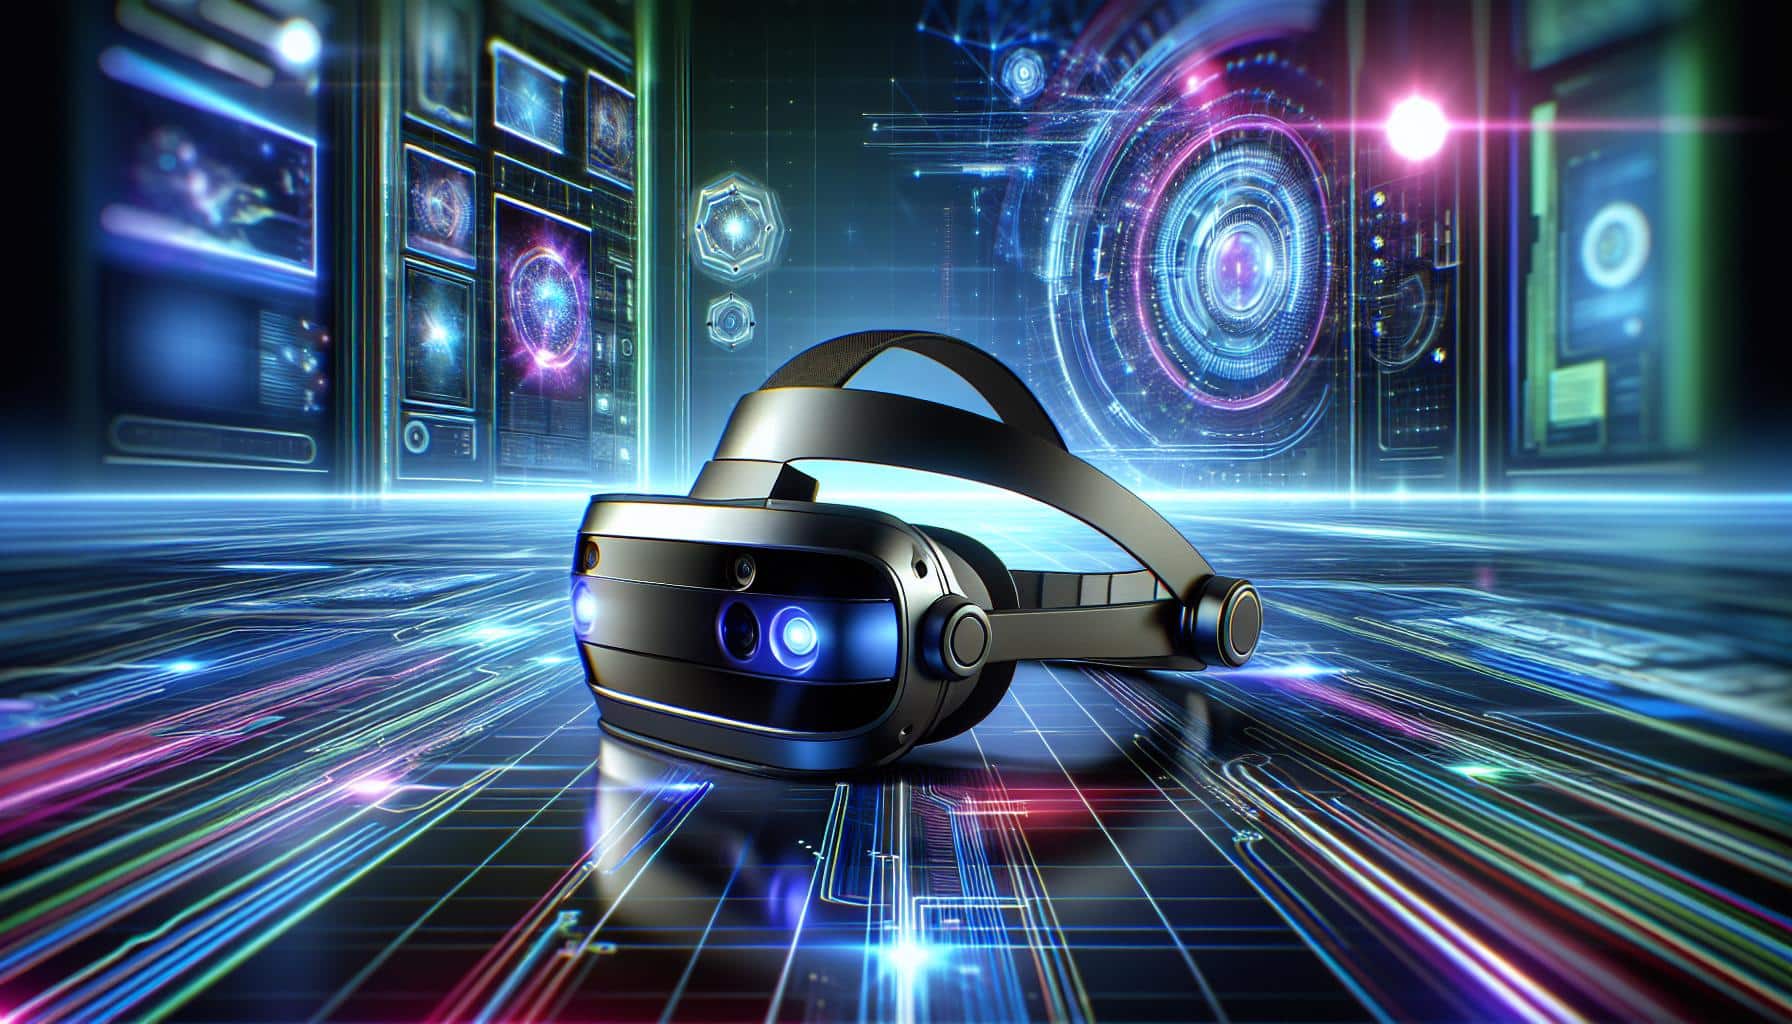 Apple's Vision Pro Mixed Reality Headset: A Game-Changer in AR/VR | FinOracle